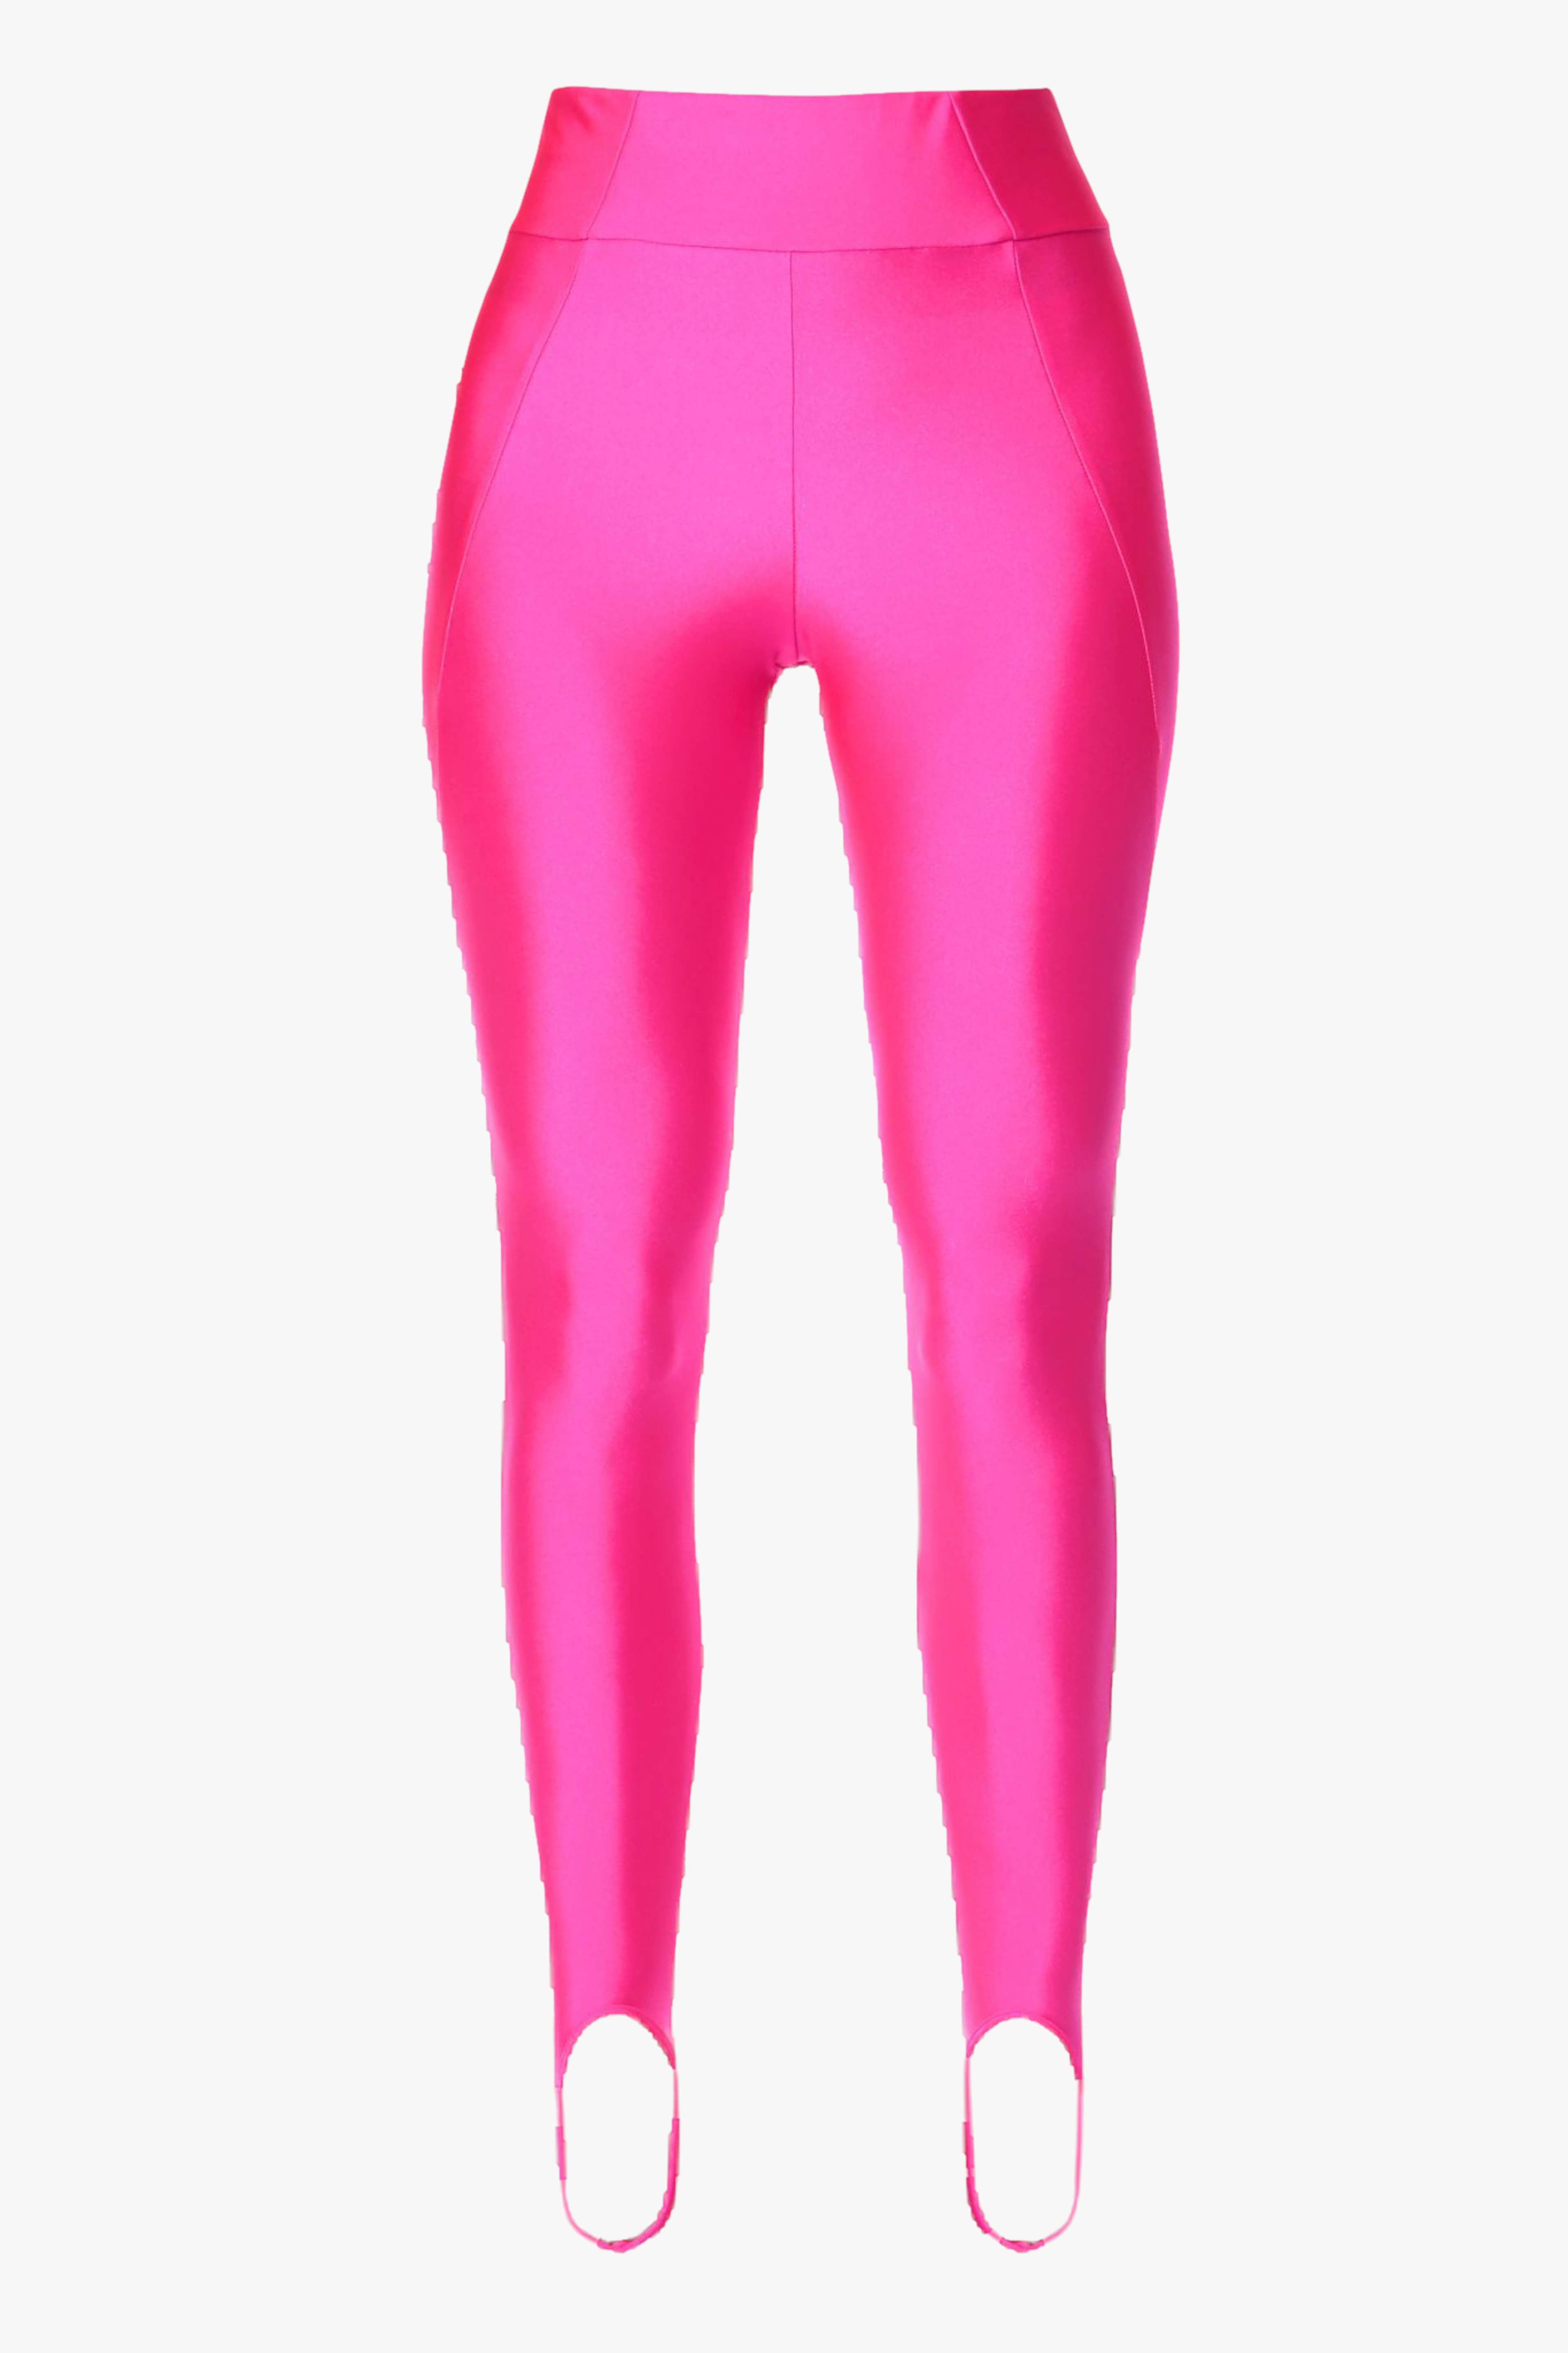 Shop Pants Gia Plastic Pink from AGGI at Seezona